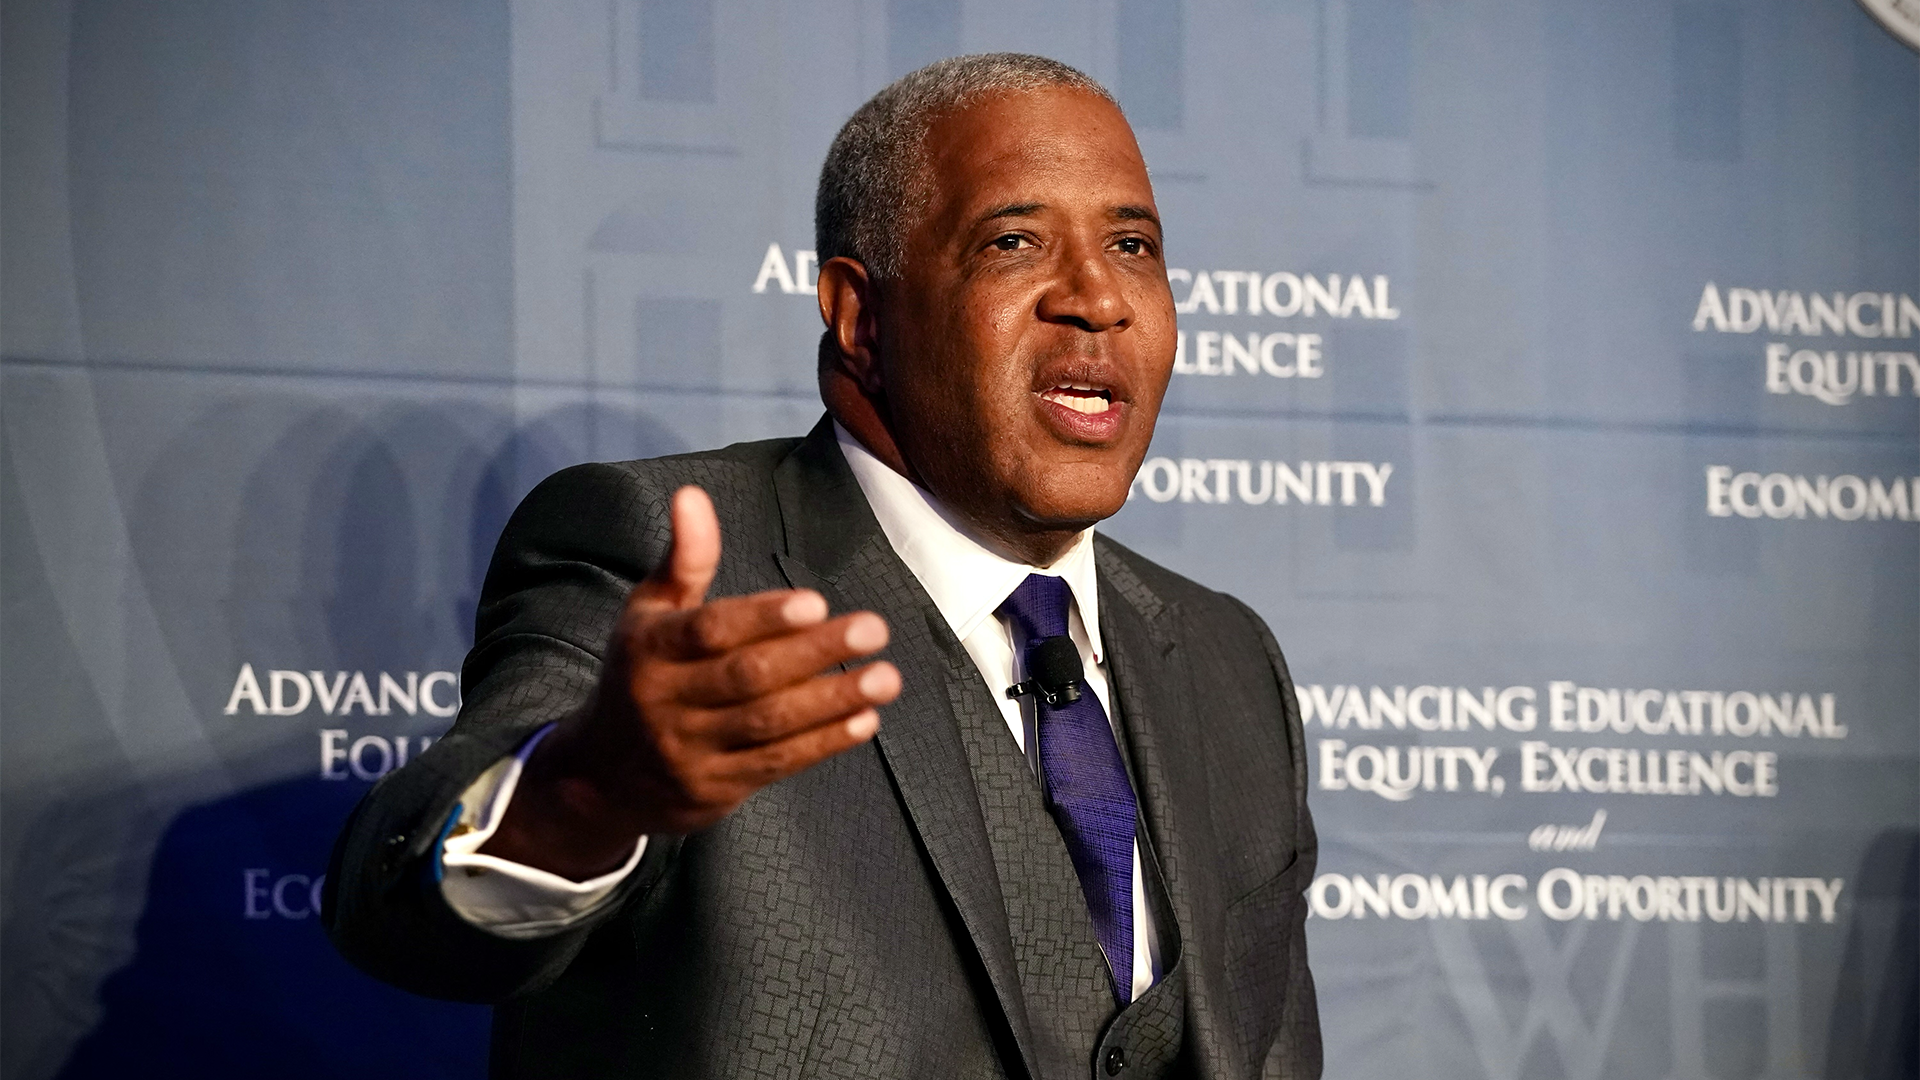 82 Percent Of HBCUs Are Broadband Deserts — Here's How Billionaire Robert F. Smith Has Formed A Partnership To Change That